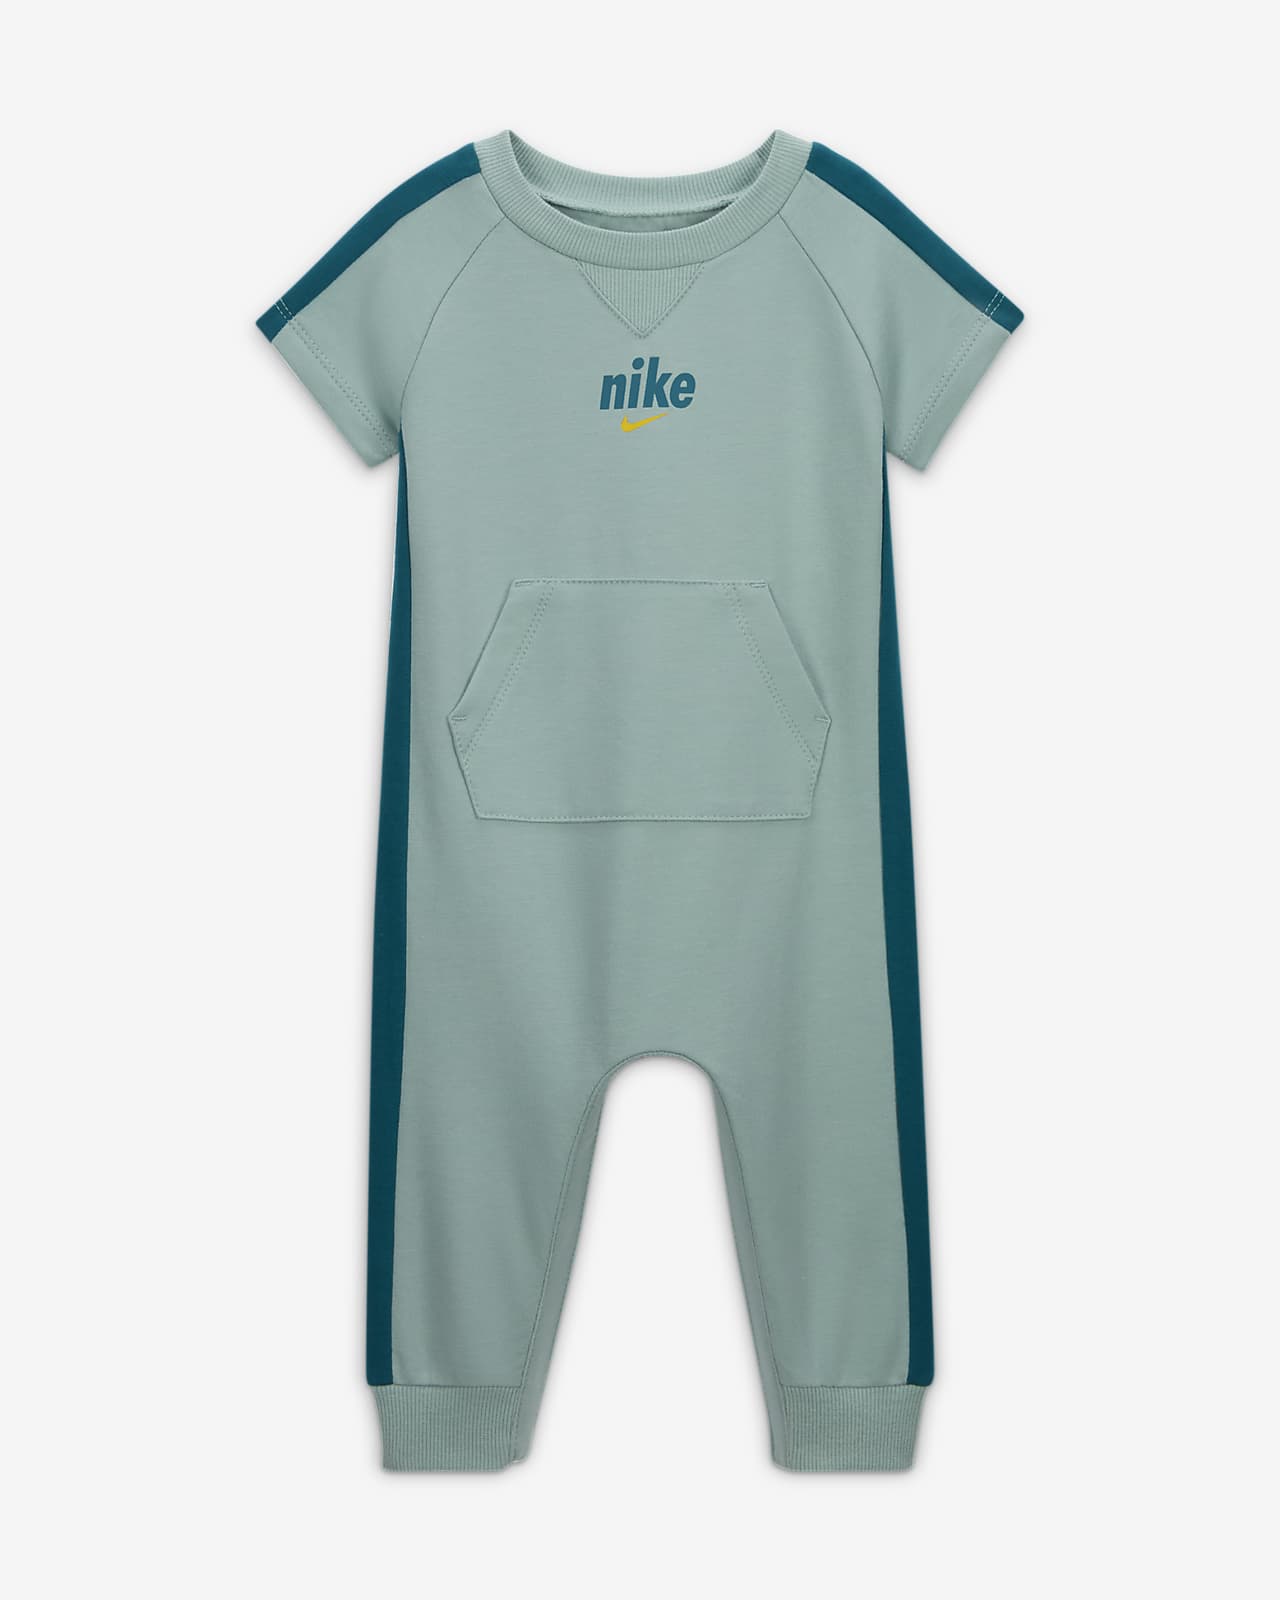 Nike E1D1 Footless Coverall Baby Coverall